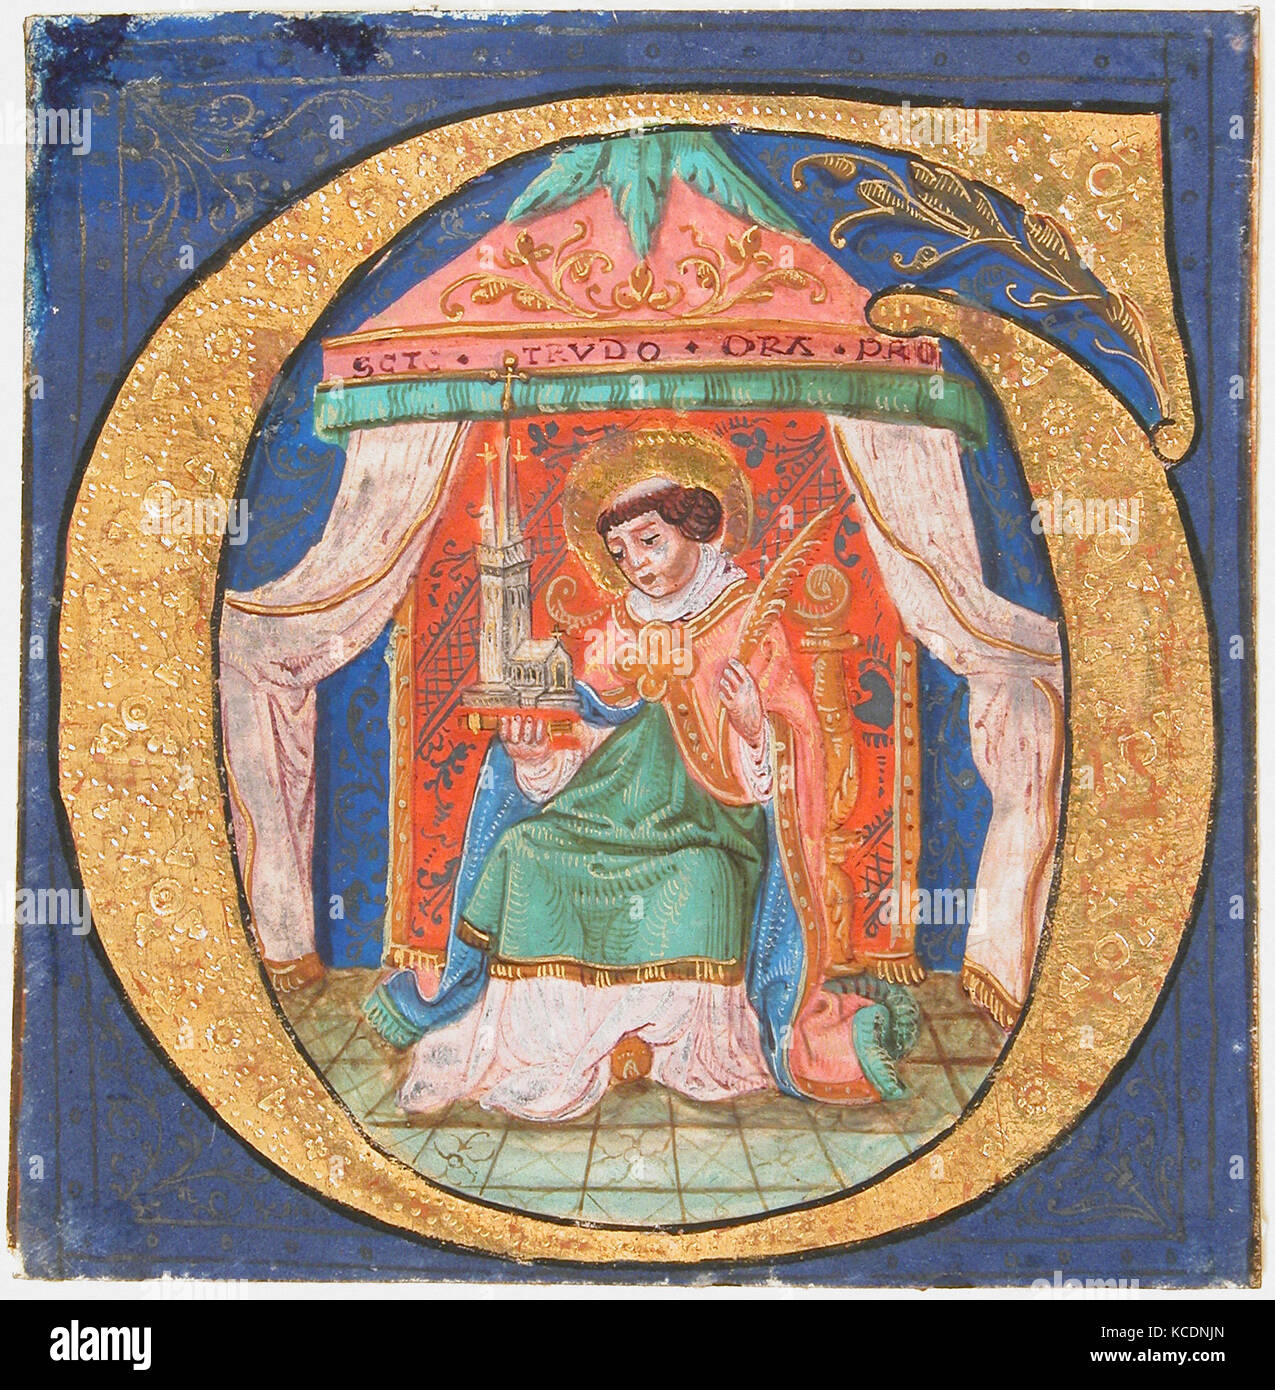 Manuscript Illumination with Saint Trudo (Trond) in an Initial O, from a Choir Book, 15th century Stock Photo